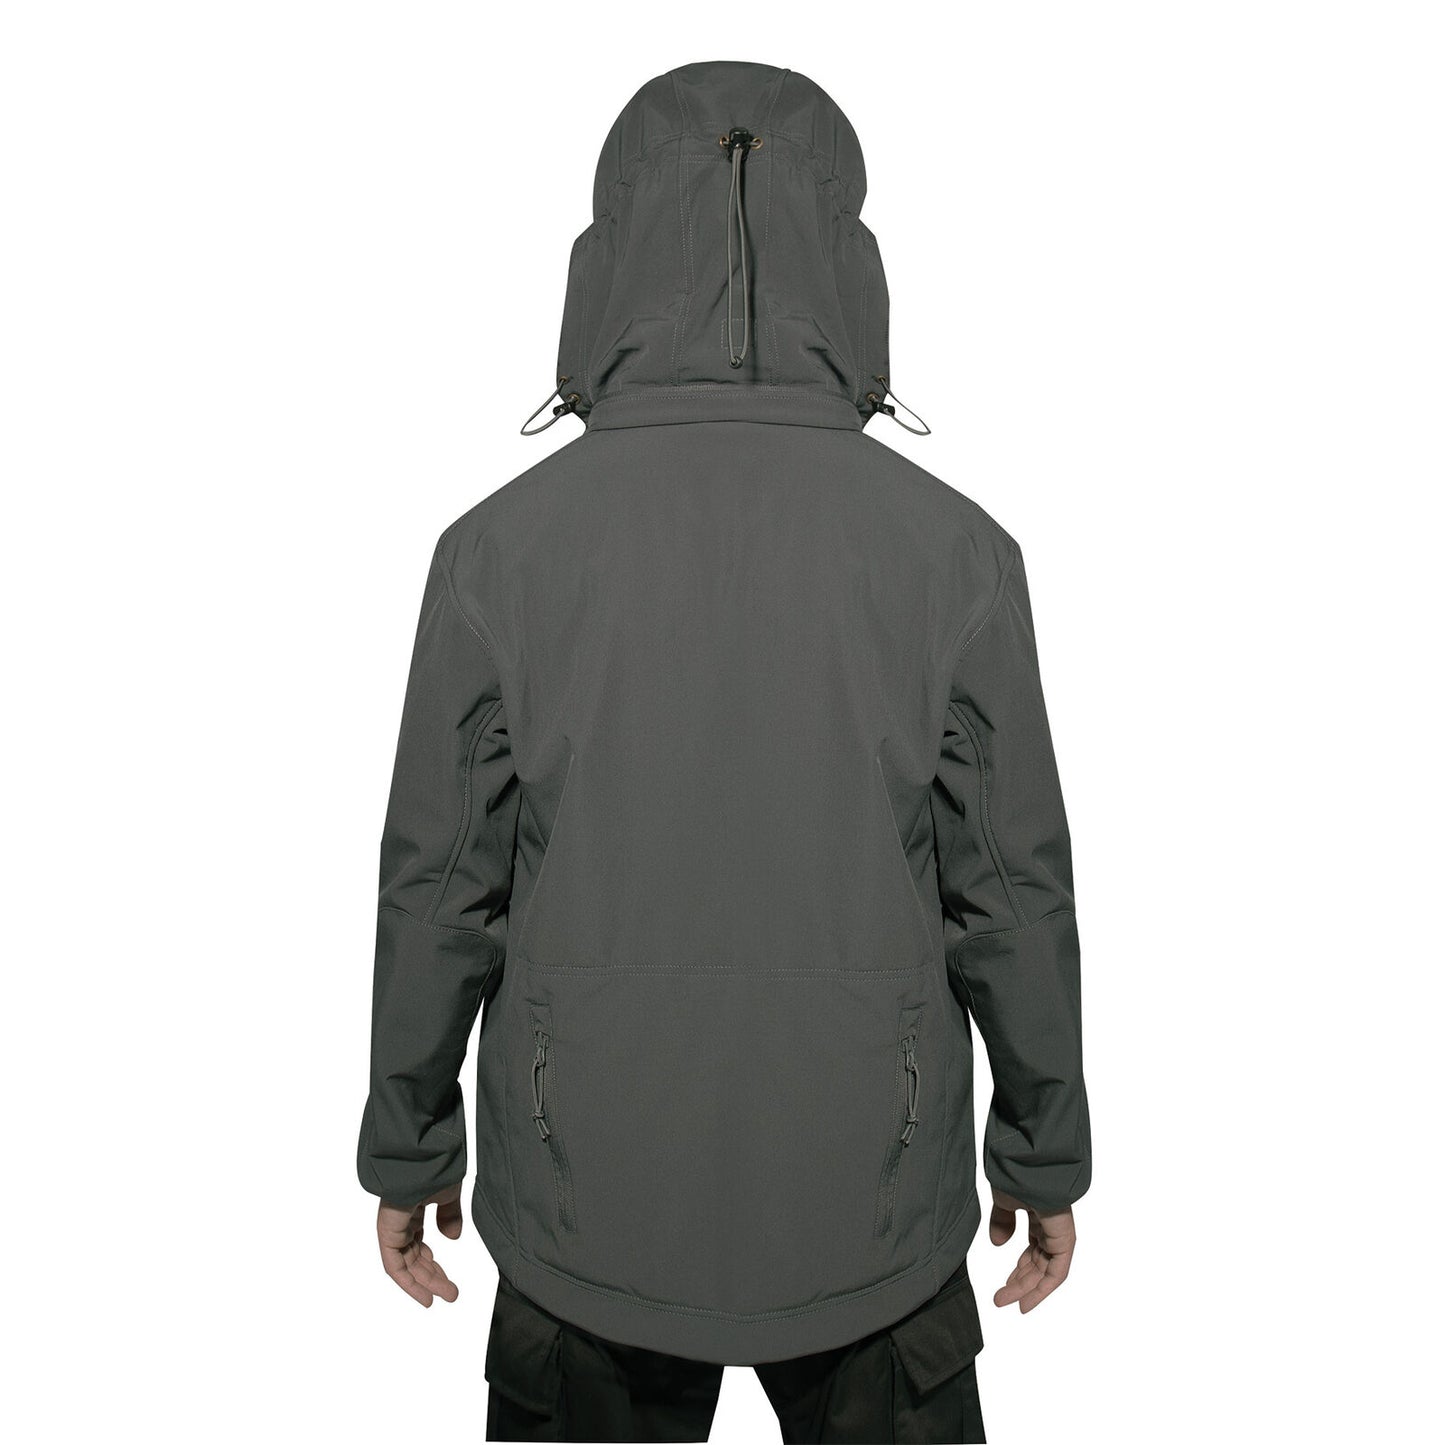 Men's Gunmetal Grey Concealed Carry Soft Shell Jacket w/ Removable Hood